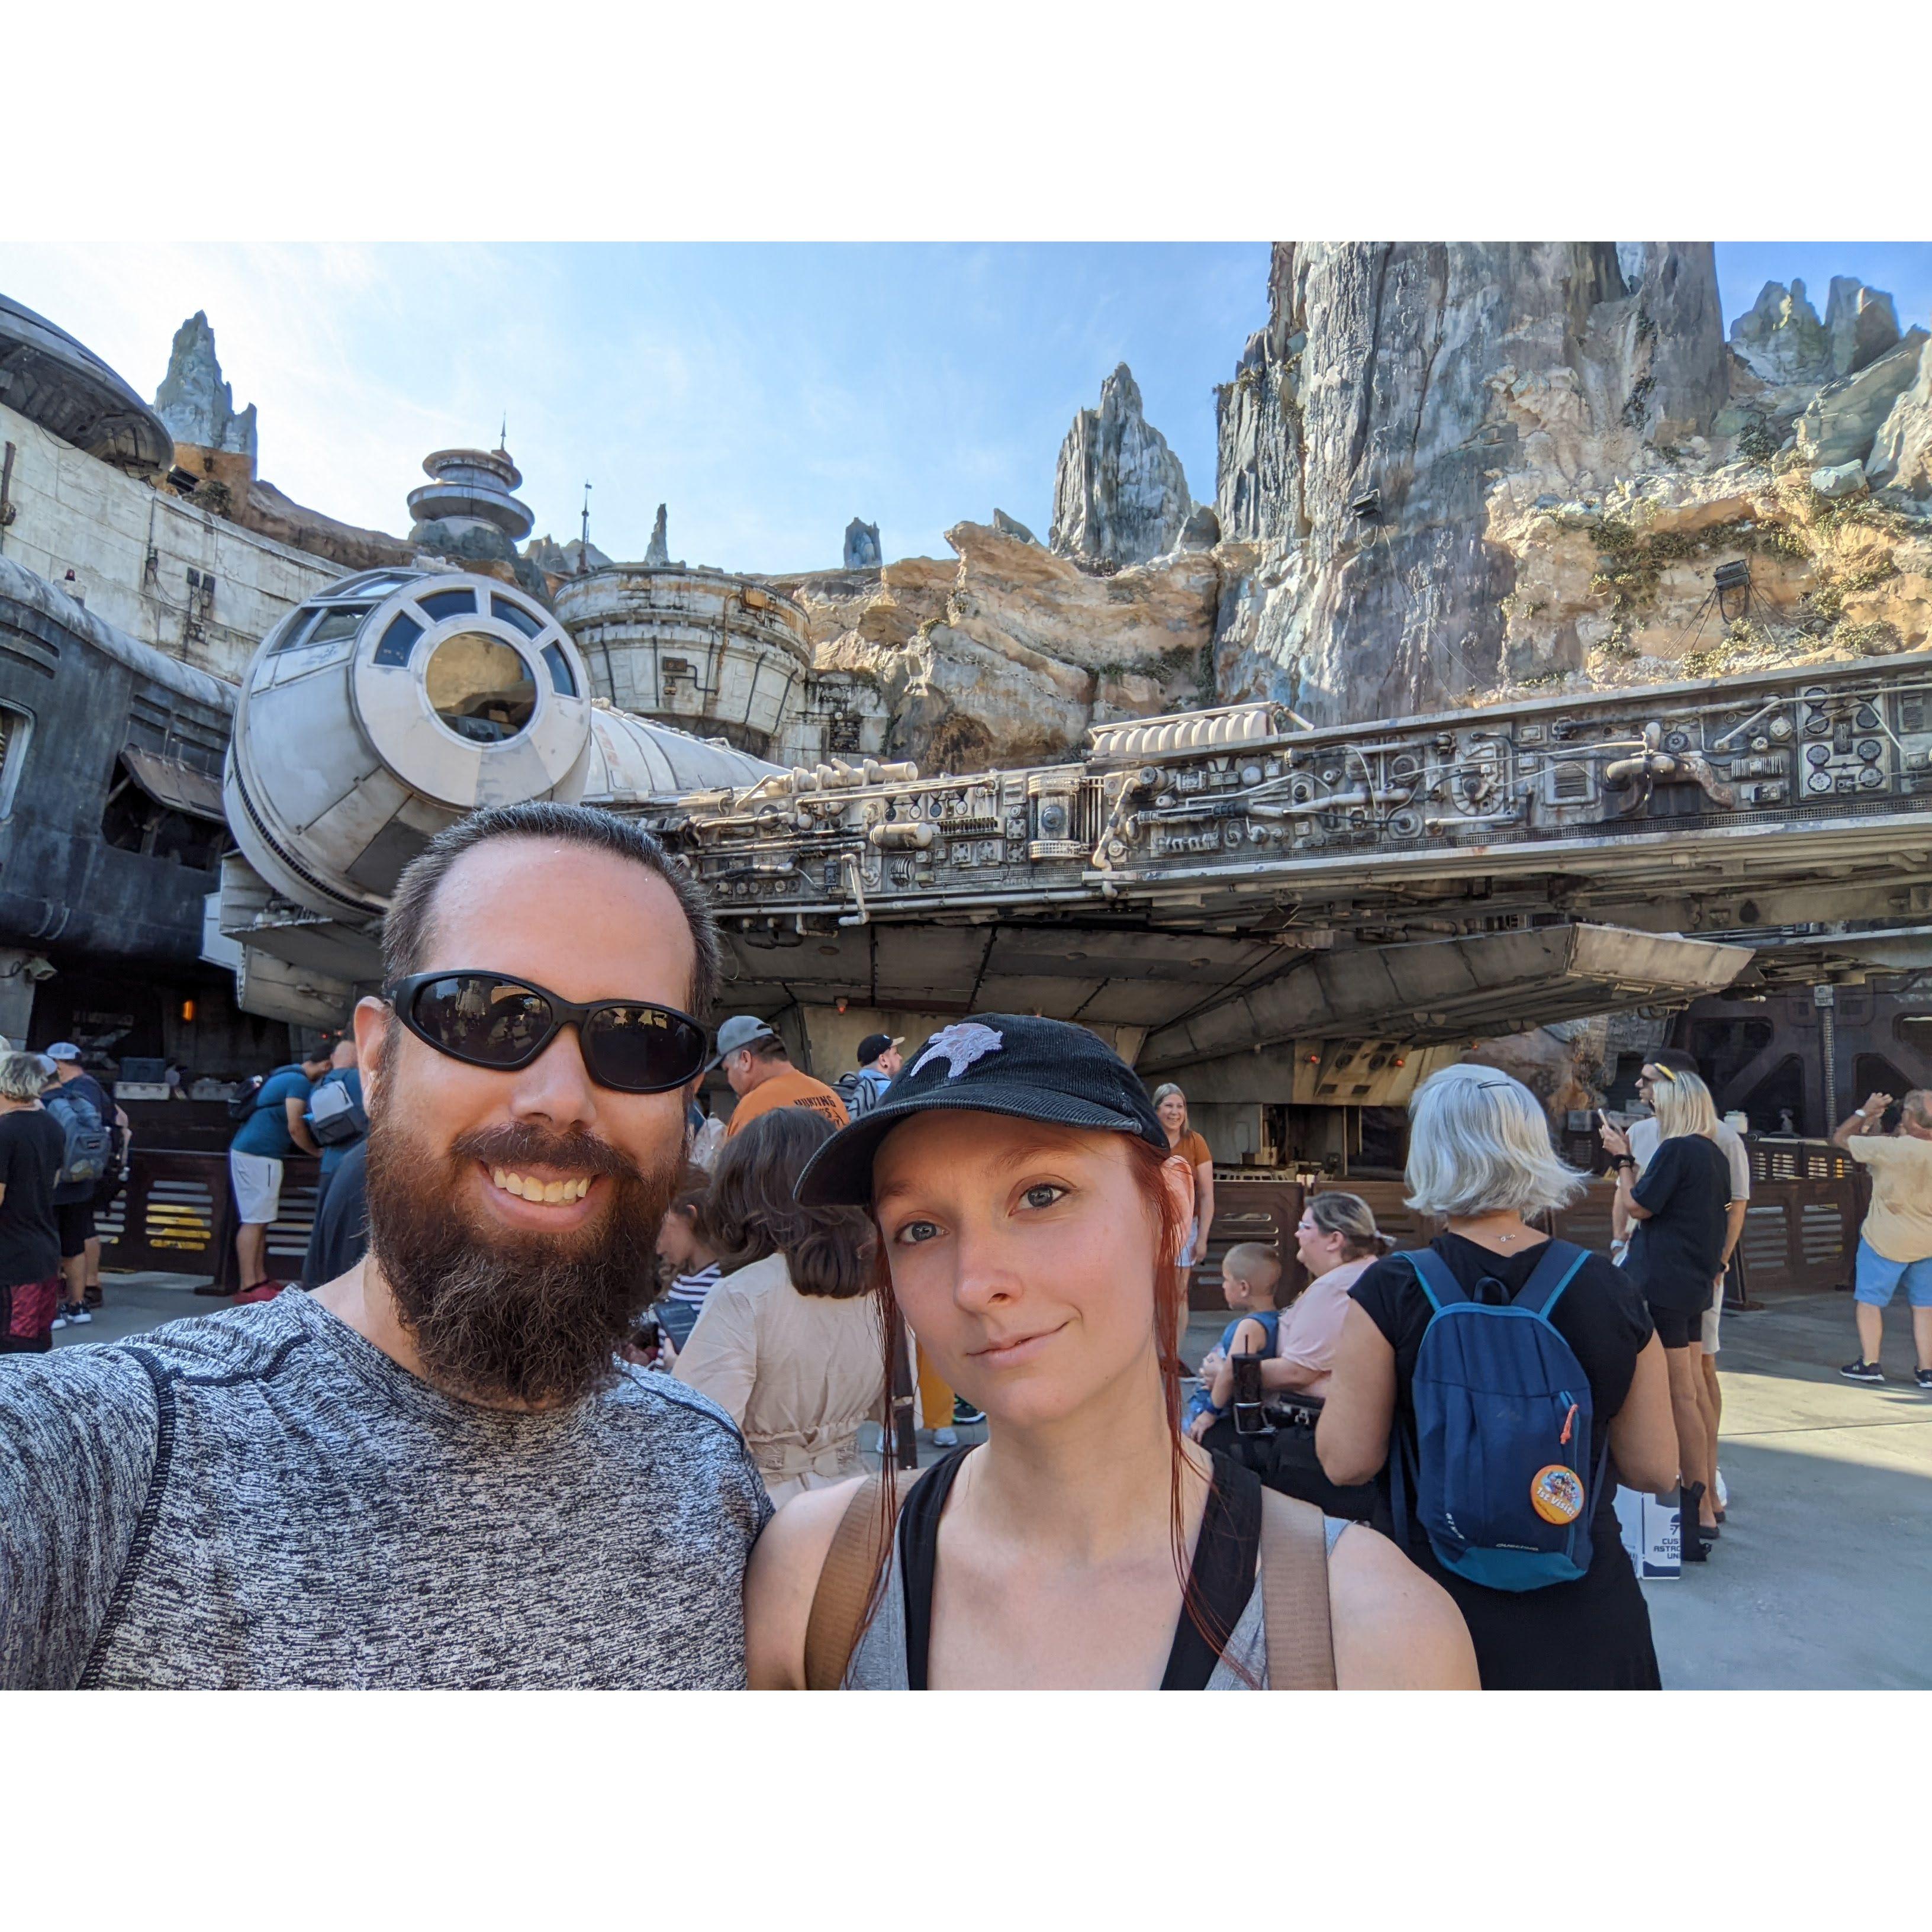 Dale's First trip to Disney, had to get the obligatory photo in the Millennium Falcon